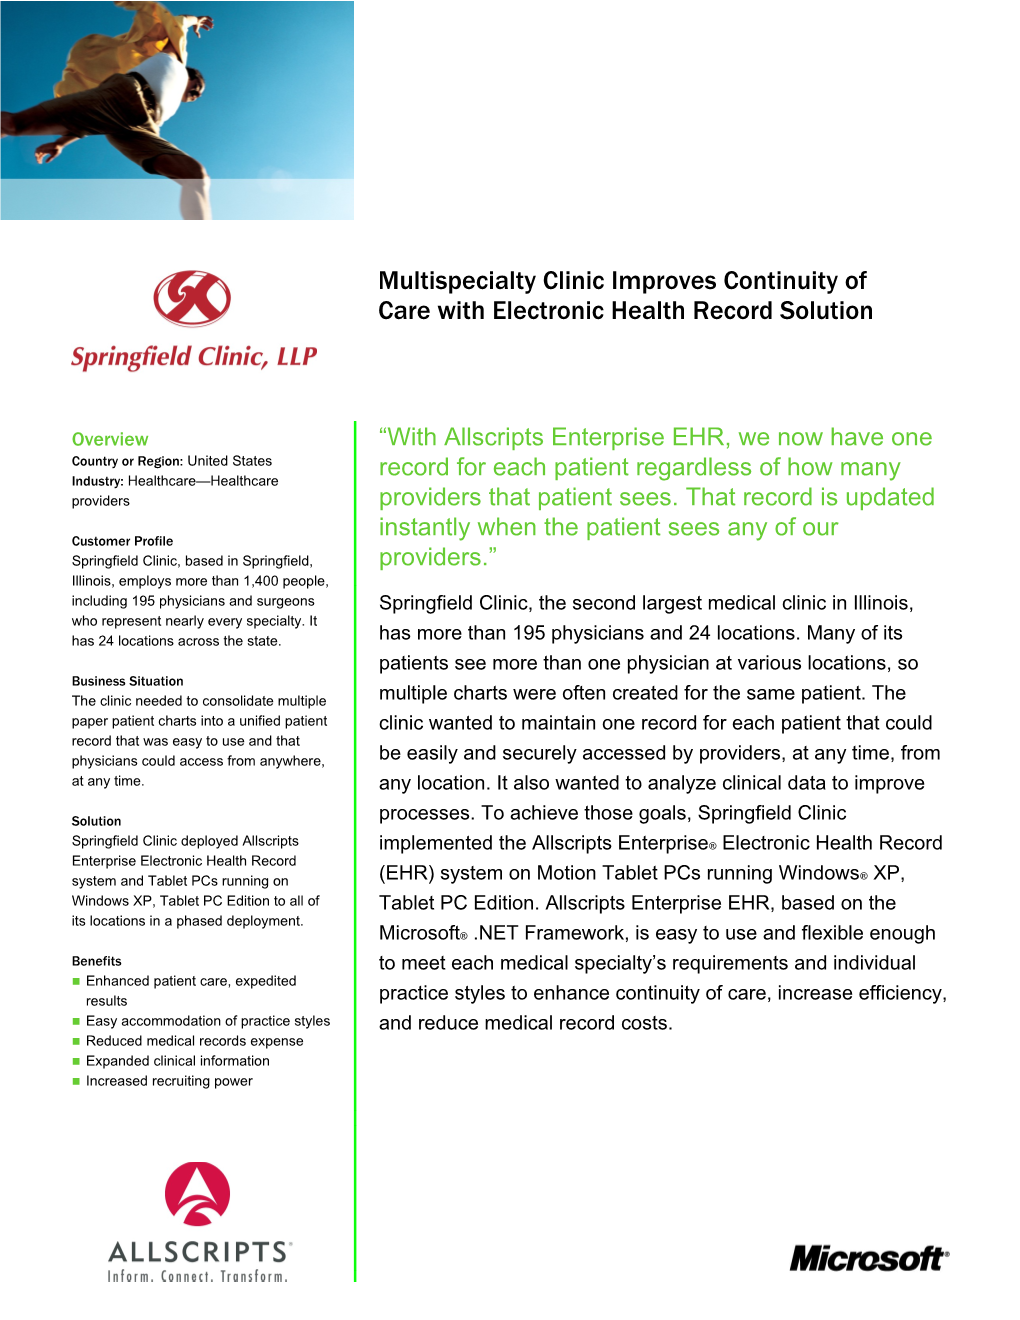 Multispecialty Clinic Improves Continuity of Care with Electronic Health Record Solution